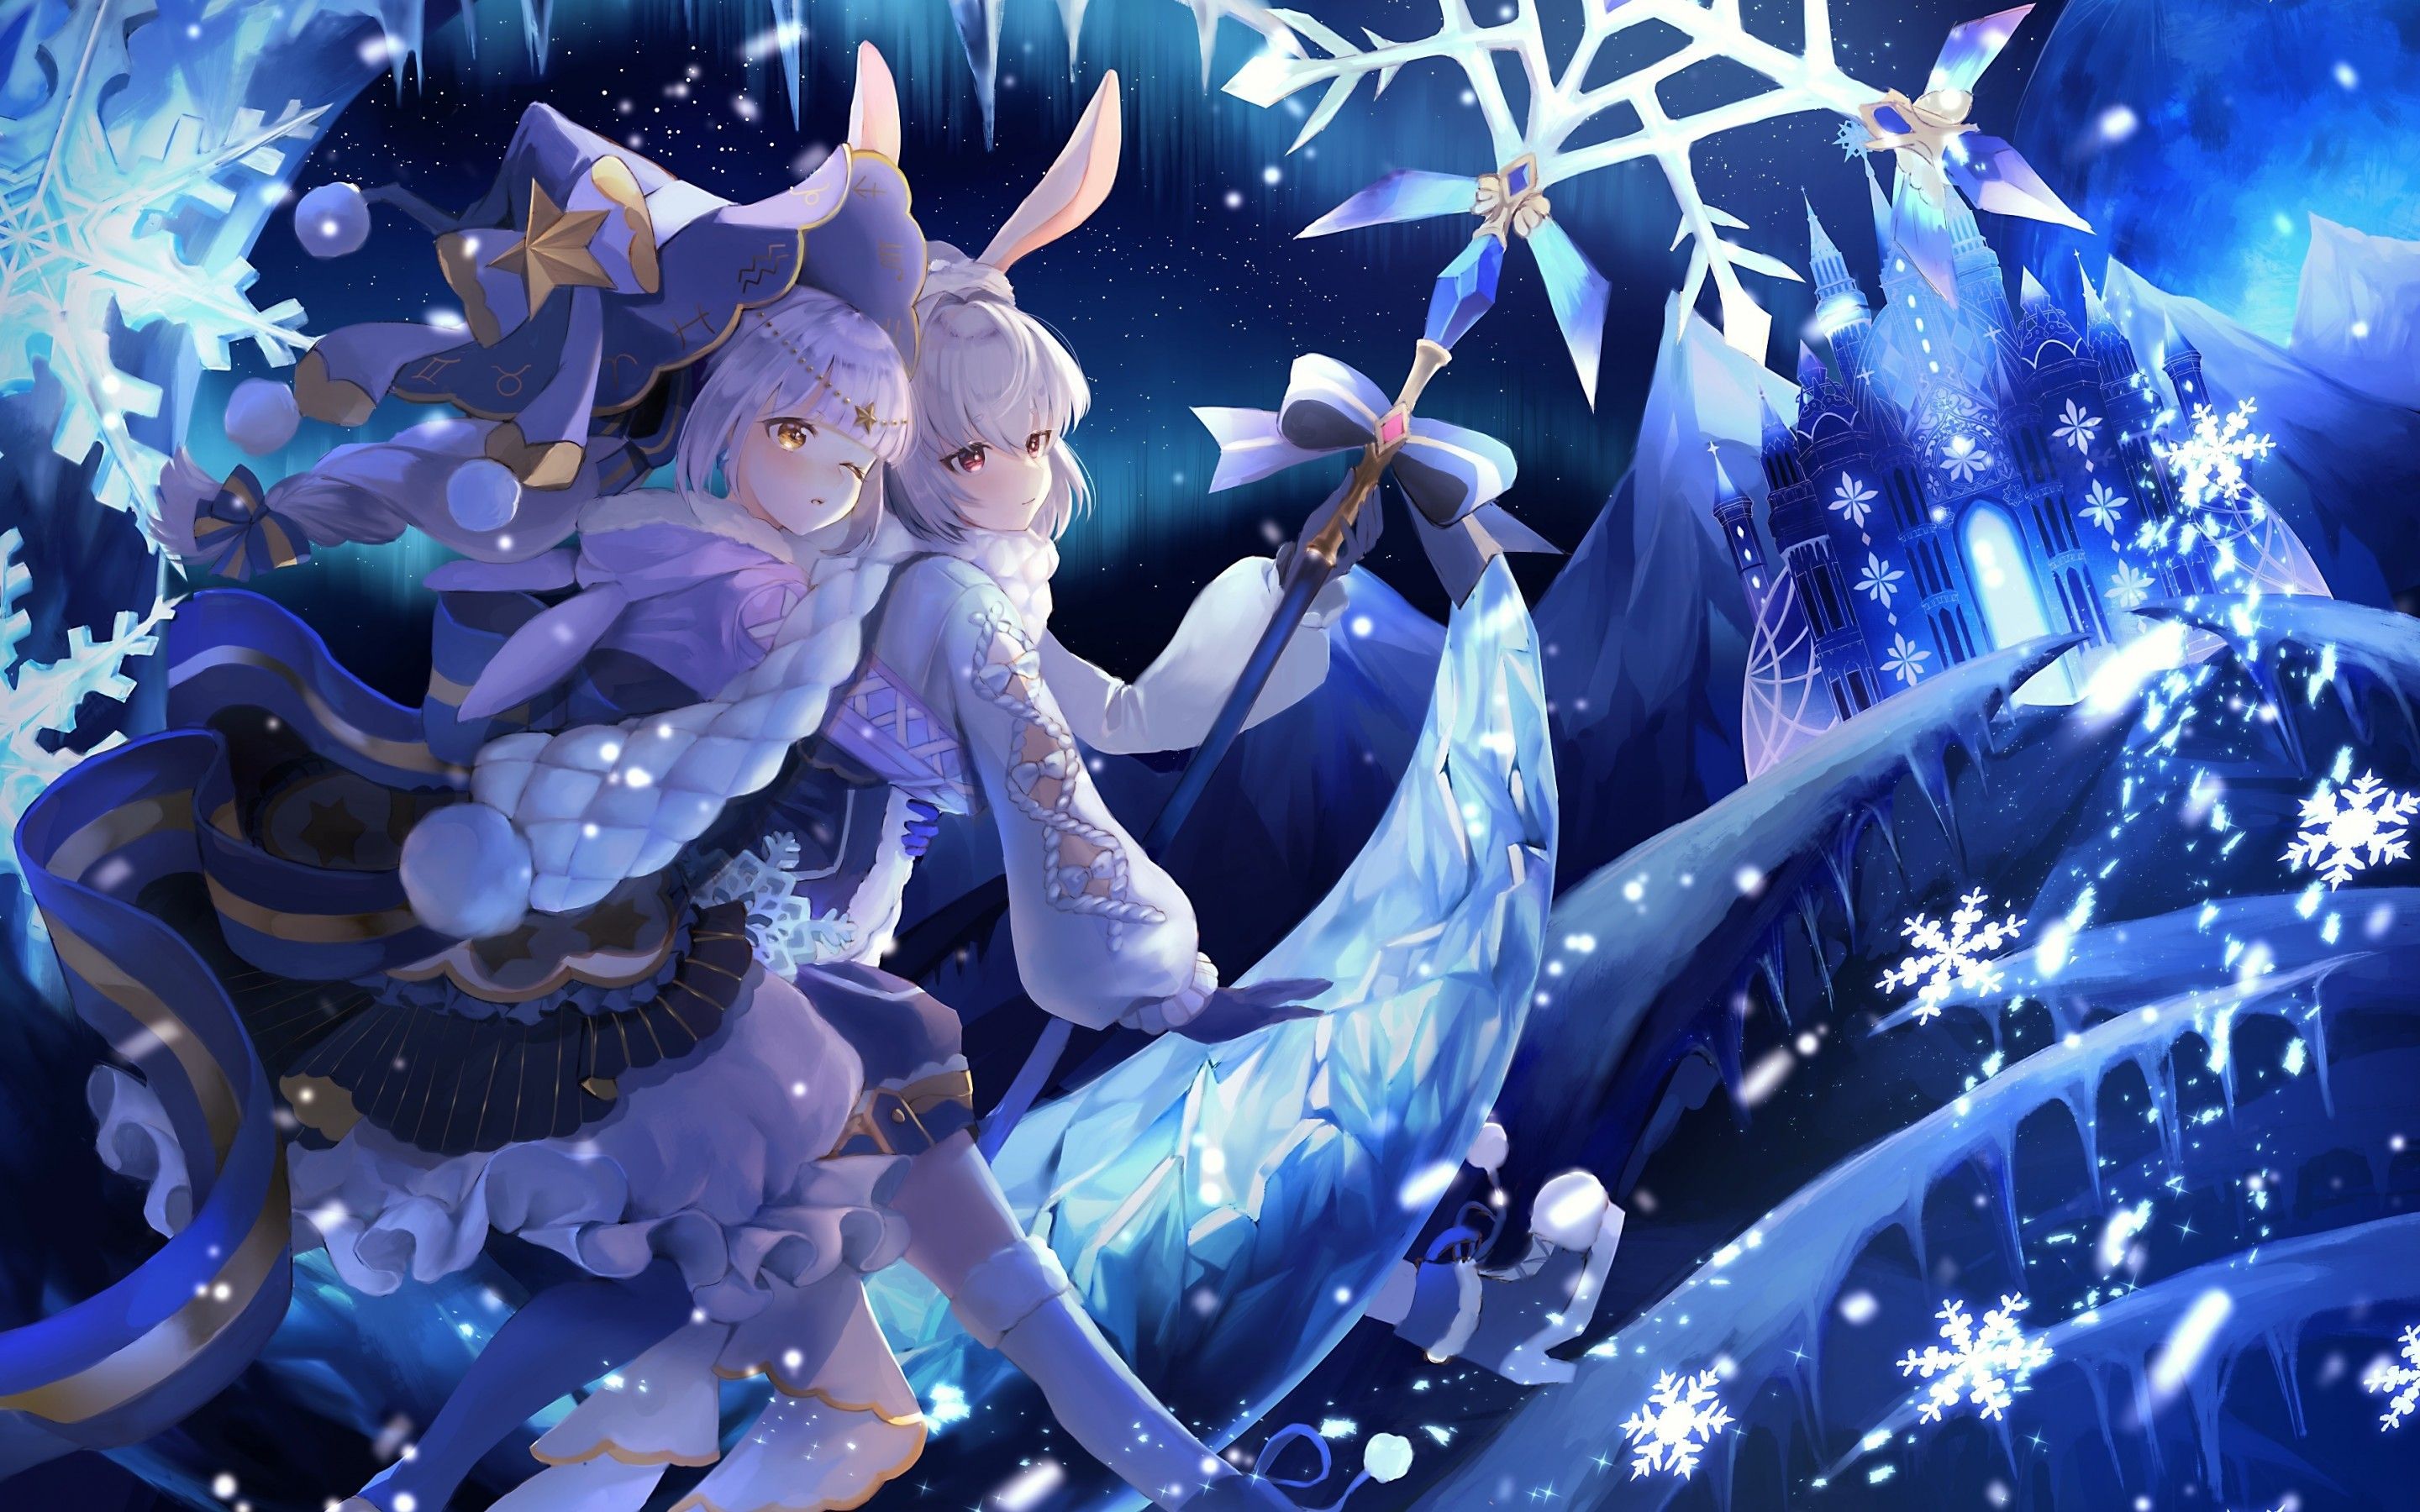 fire and ice girls wallpaper